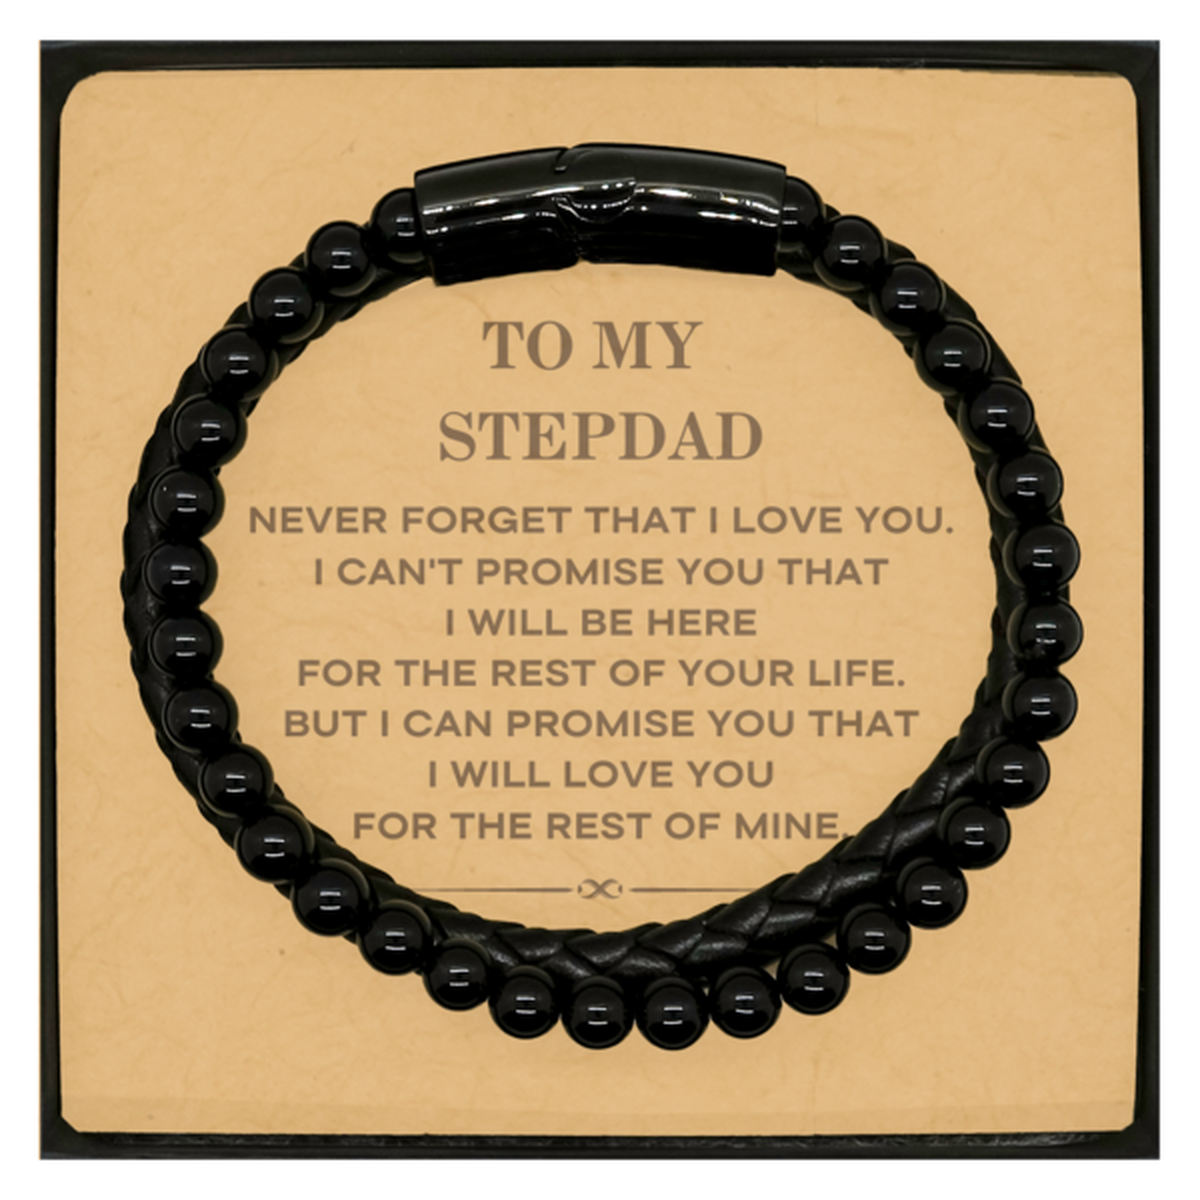 To My Stepdad Gifts, I will love you for the rest of mine, Love Stepdad Bracelet, Birthday Christmas Unique Stone Leather Bracelets For Stepdad